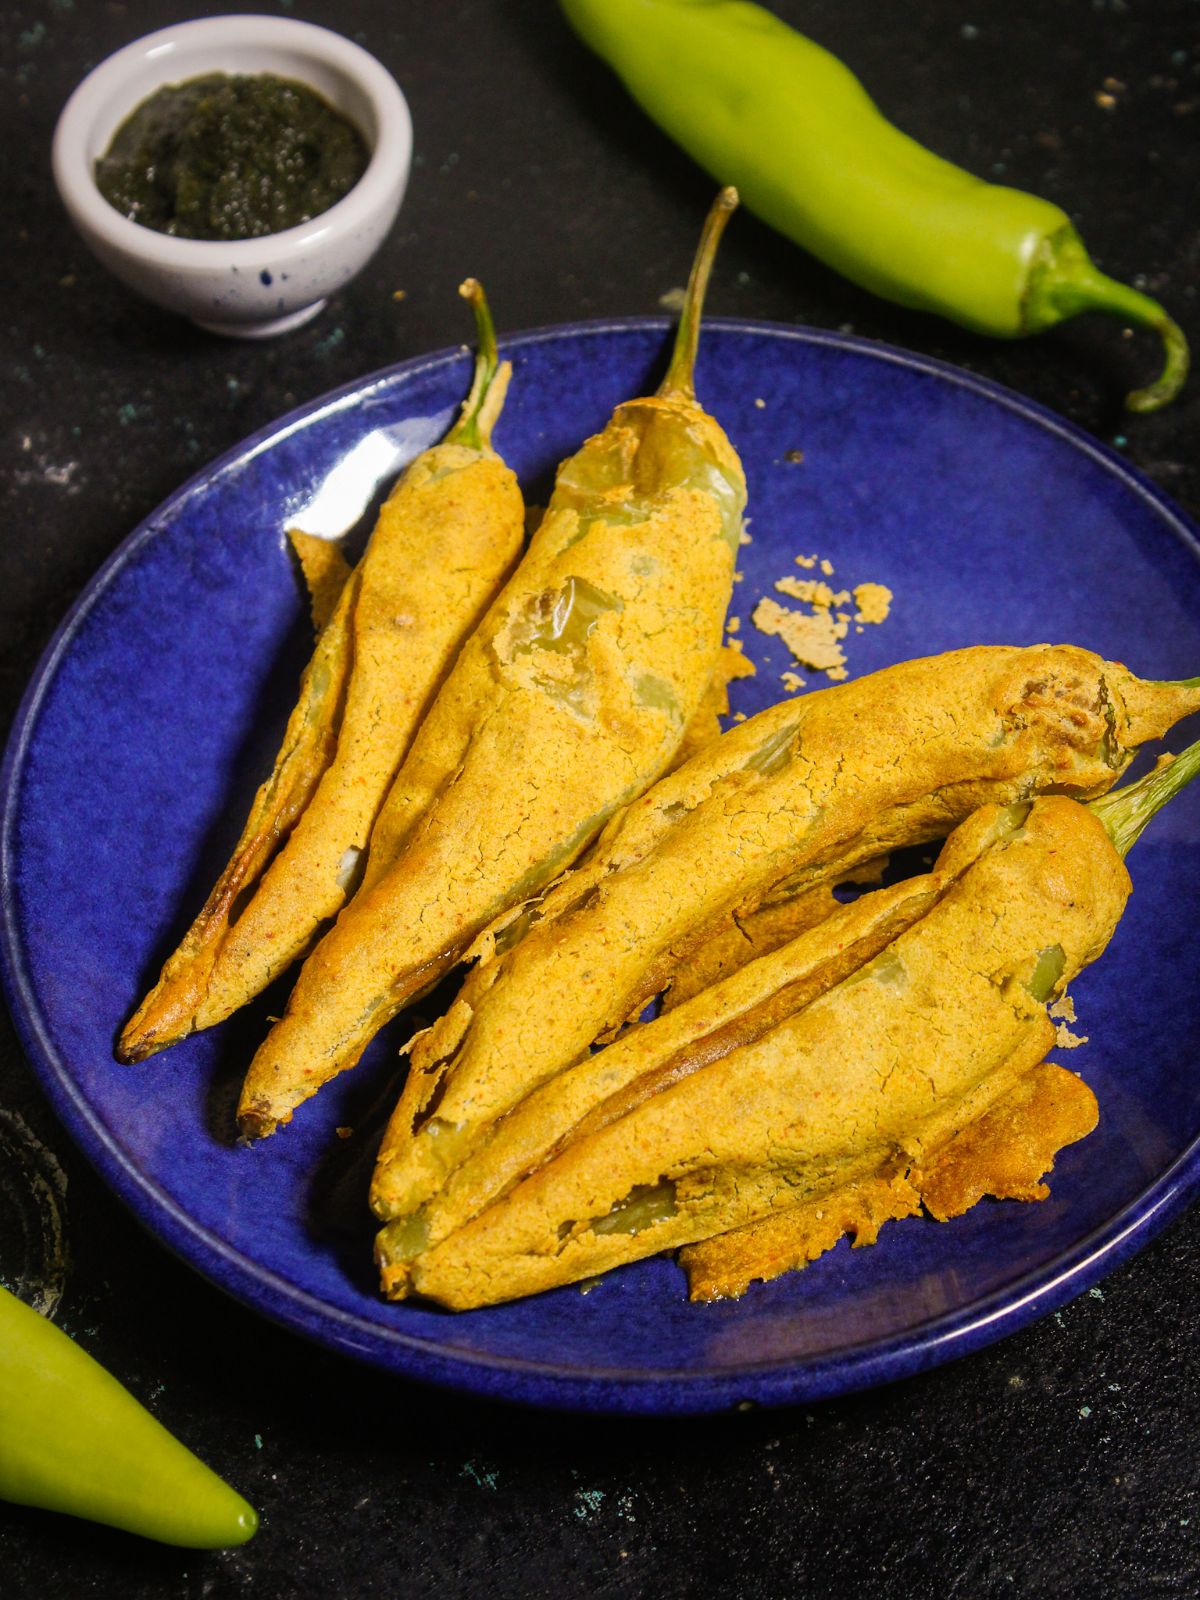 Spicy Air Fried Mirchi Bhajjis with Tangy Surprise ready to enjoy with tea